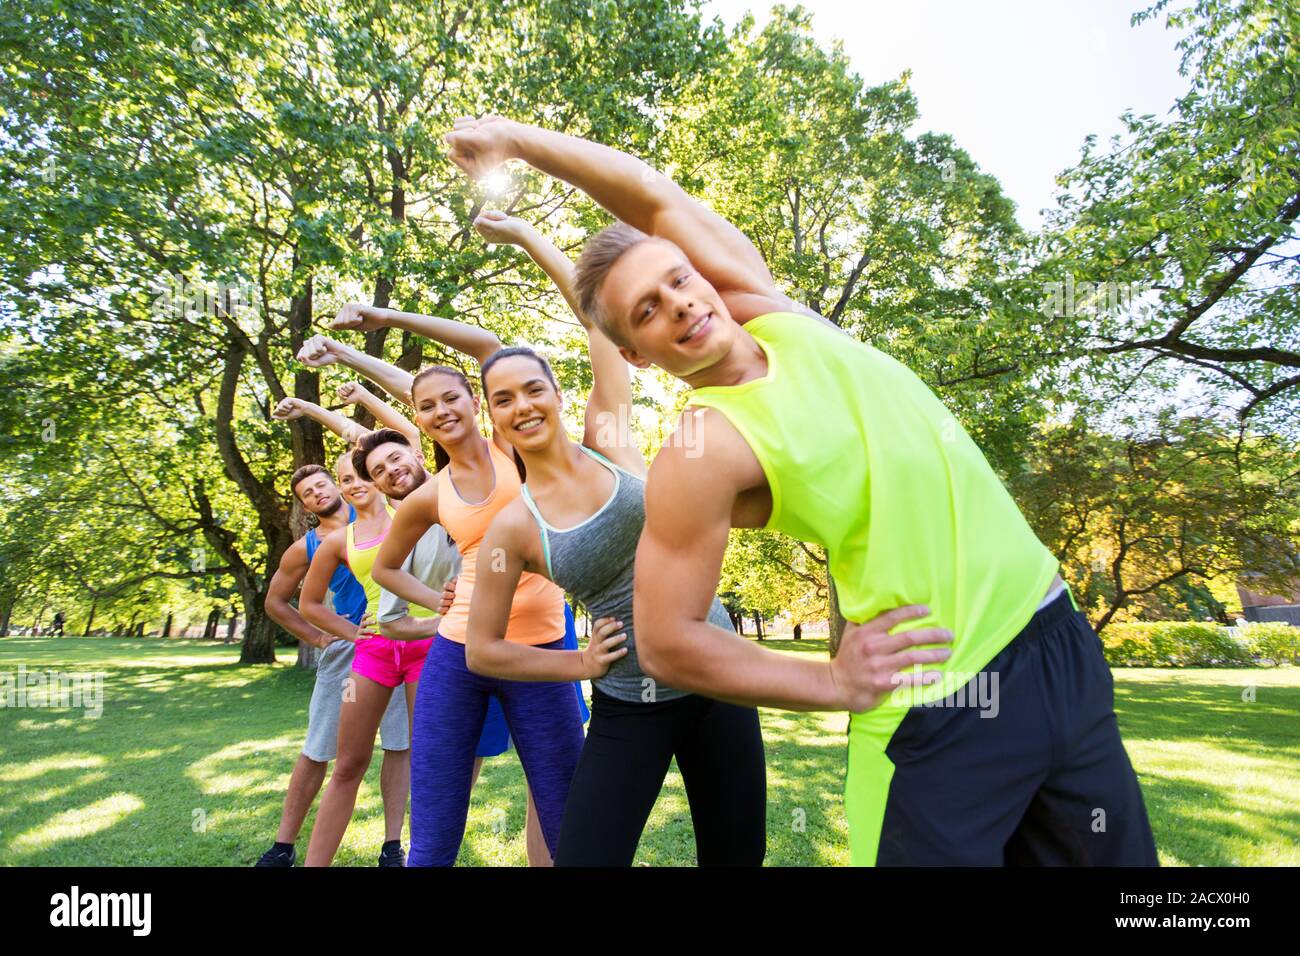 fitness, sport and healthy lifestyle concept - group of happy people exercising at summer park or boot camp Stock Photo